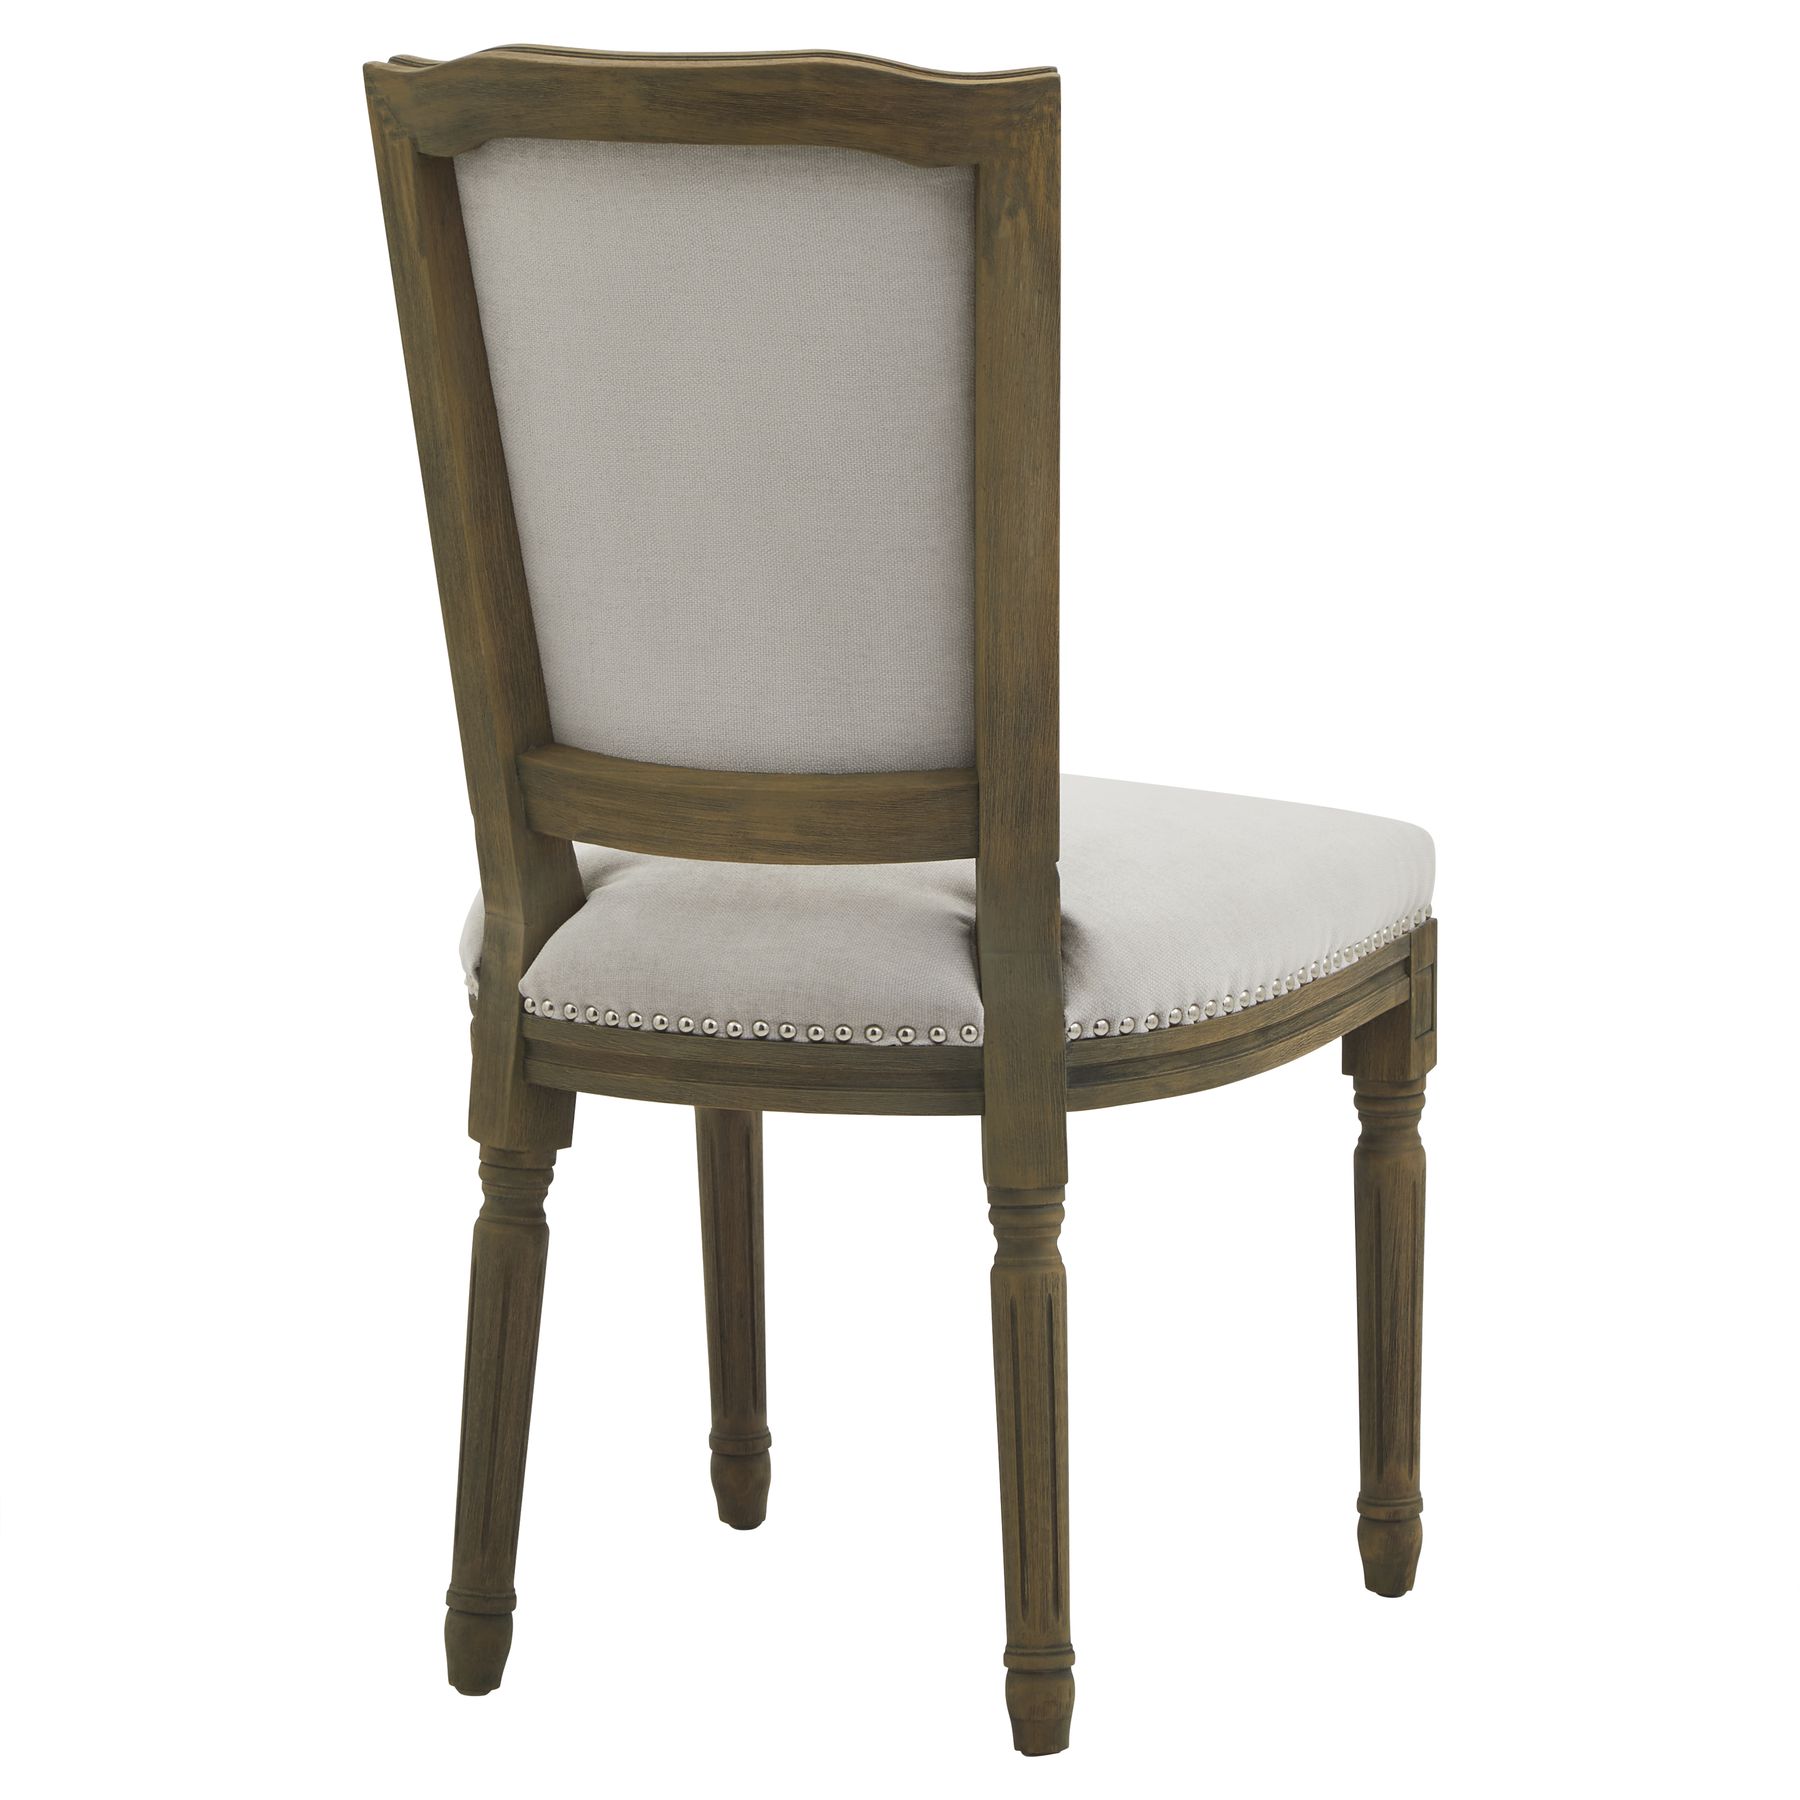 Ripley Grey Dining Chair - Image 2